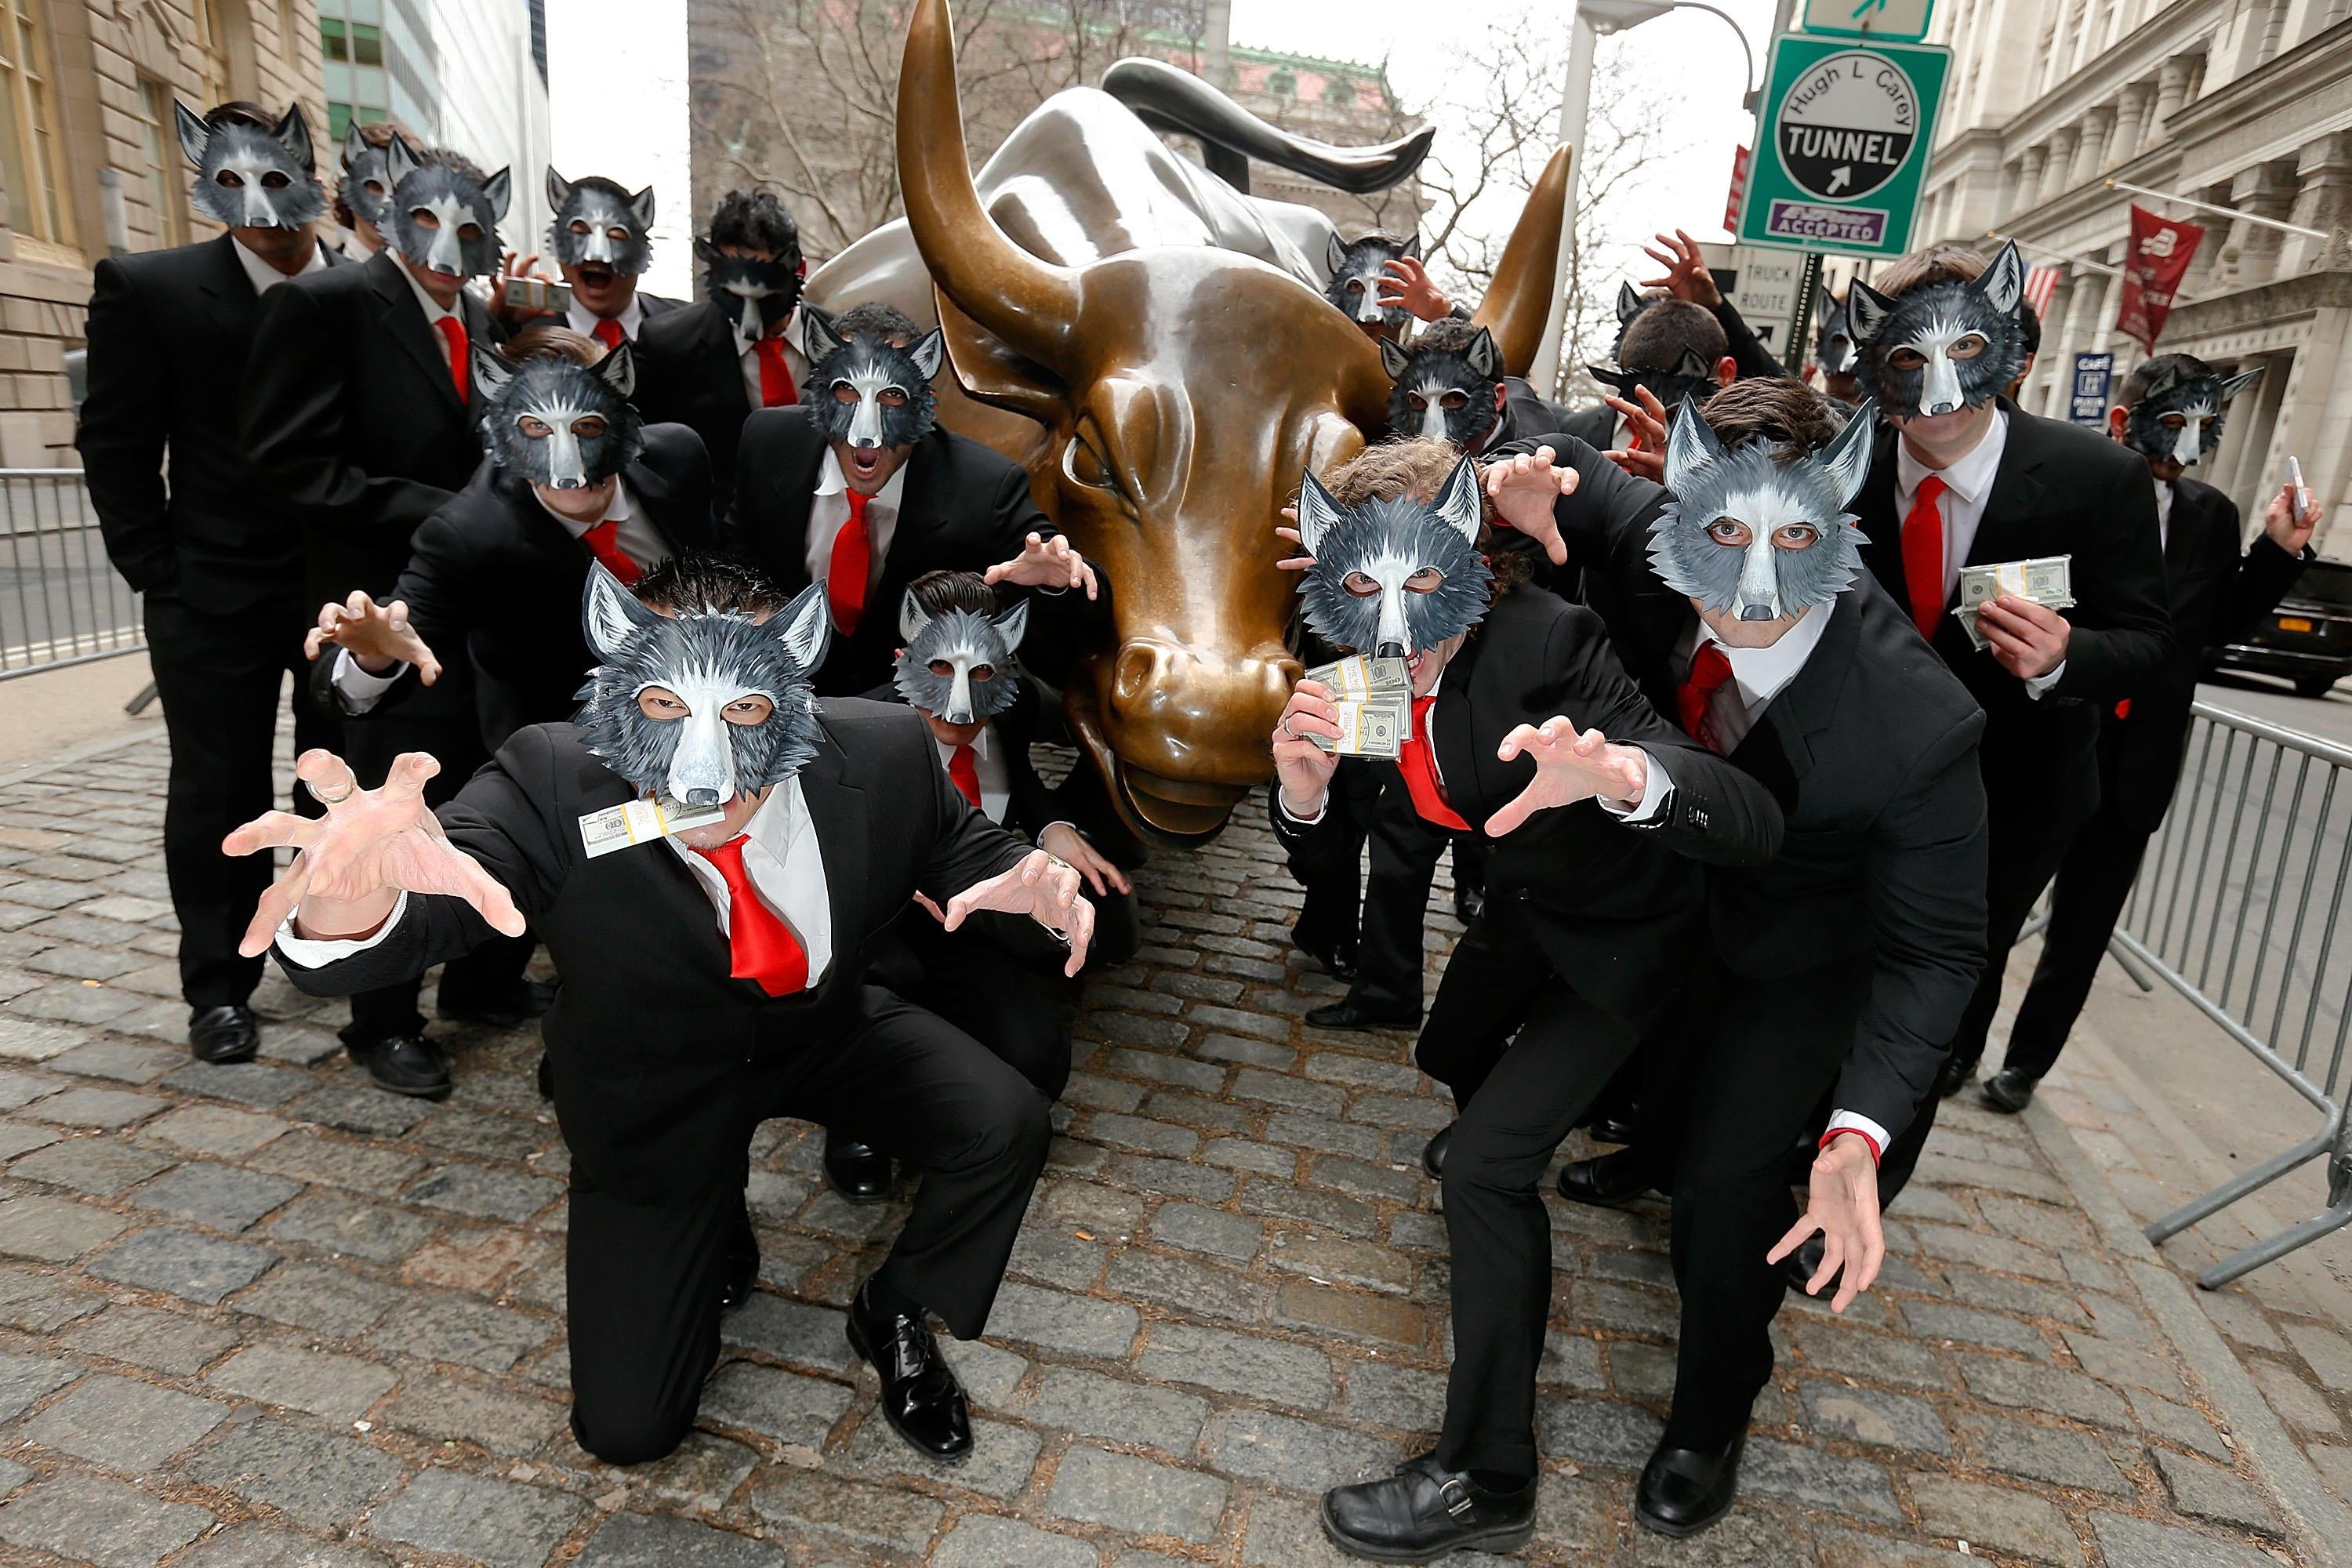 A bunch of people in wolf masks in front of the Wall Street bull statue.